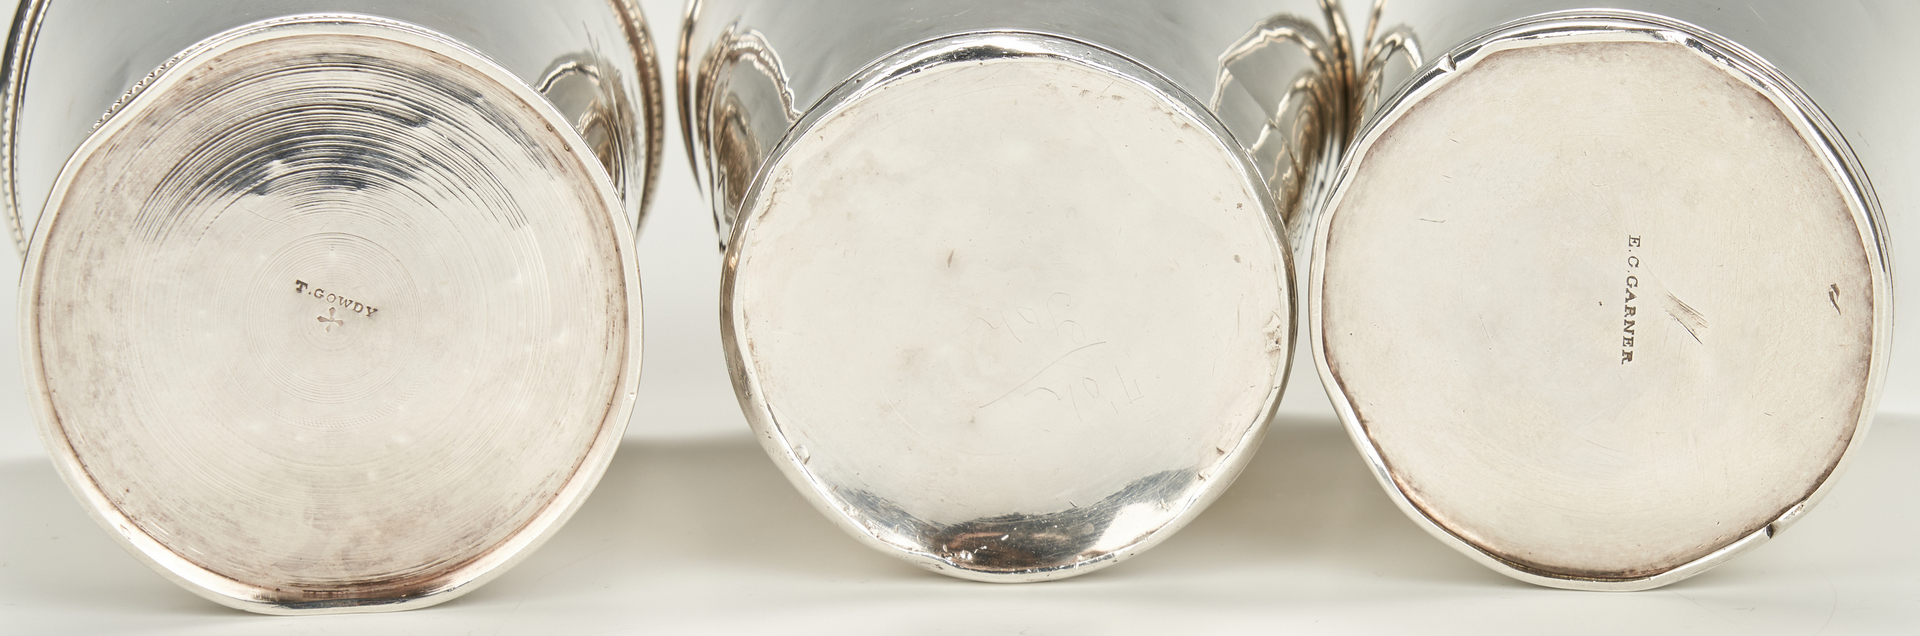 Lot 71: 3 Coin Silver Mint Julep Cups, Washington Family Crest